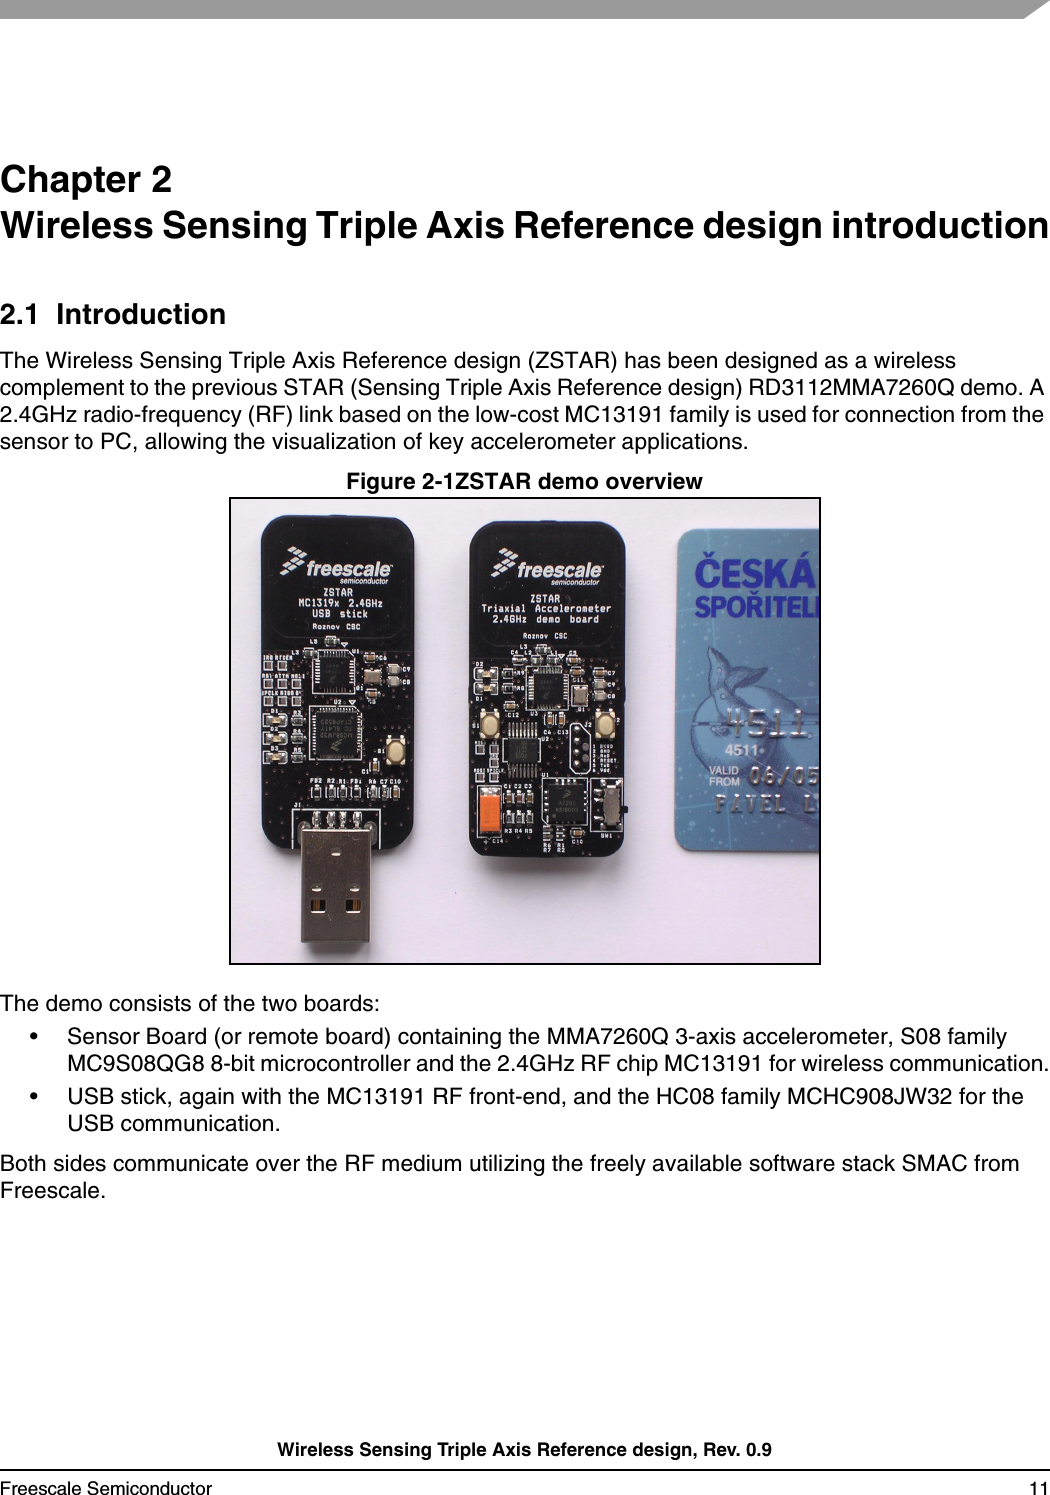 Wireless Sensing Triple Axis Reference design, Rev. 0.9Freescale Semiconductor 11Chapter 2 Wireless Sensing Triple Axis Reference design introduction2.1  IntroductionThe Wireless Sensing Triple Axis Reference design (ZSTAR) has been designed as a wireless complement to the previous STAR (Sensing Triple Axis Reference design) RD3112MMA7260Q demo. A 2.4GHz radio-frequency (RF) link based on the low-cost MC13191 family is used for connection from the sensor to PC, allowing the visualization of key accelerometer applications.Figure 2-1ZSTAR demo overviewThe demo consists of the two boards:• Sensor Board (or remote board) containing the MMA7260Q 3-axis accelerometer, S08 family MC9S08QG8 8-bit microcontroller and the 2.4GHz RF chip MC13191 for wireless communication.• USB stick, again with the MC13191 RF front-end, and the HC08 family MCHC908JW32 for the USB communication.Both sides communicate over the RF medium utilizing the freely available software stack SMAC from Freescale.